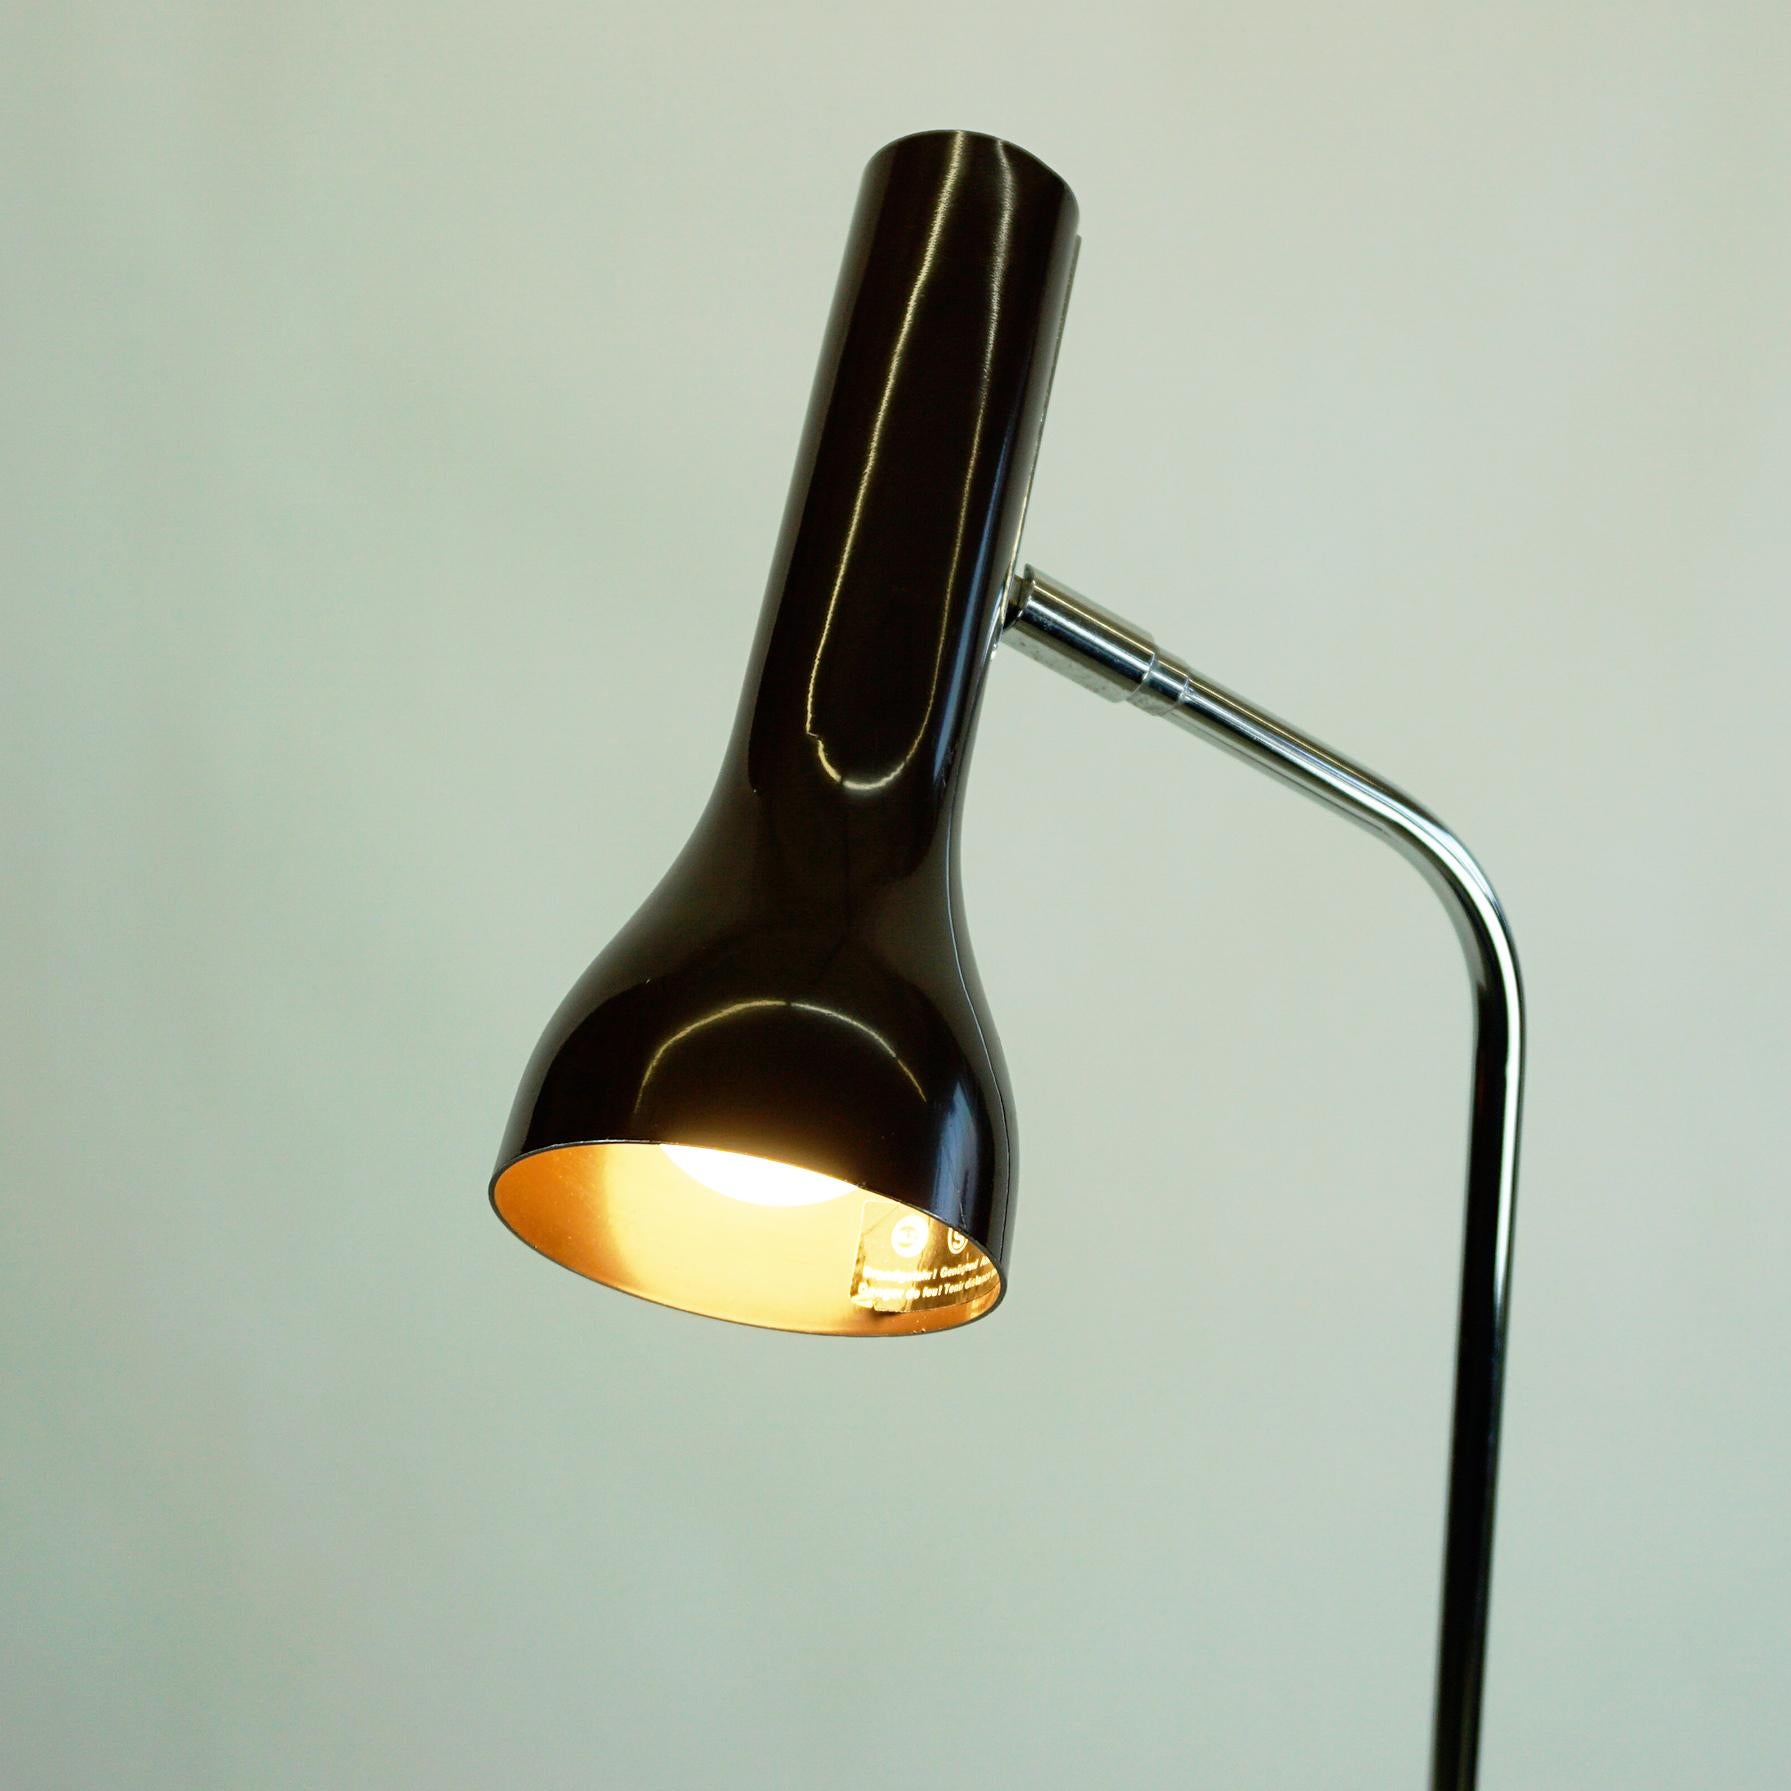 Chocolate Brown 1960s Chrome Spot Floor Lamp by LAD Team for Swiss Lamps 3